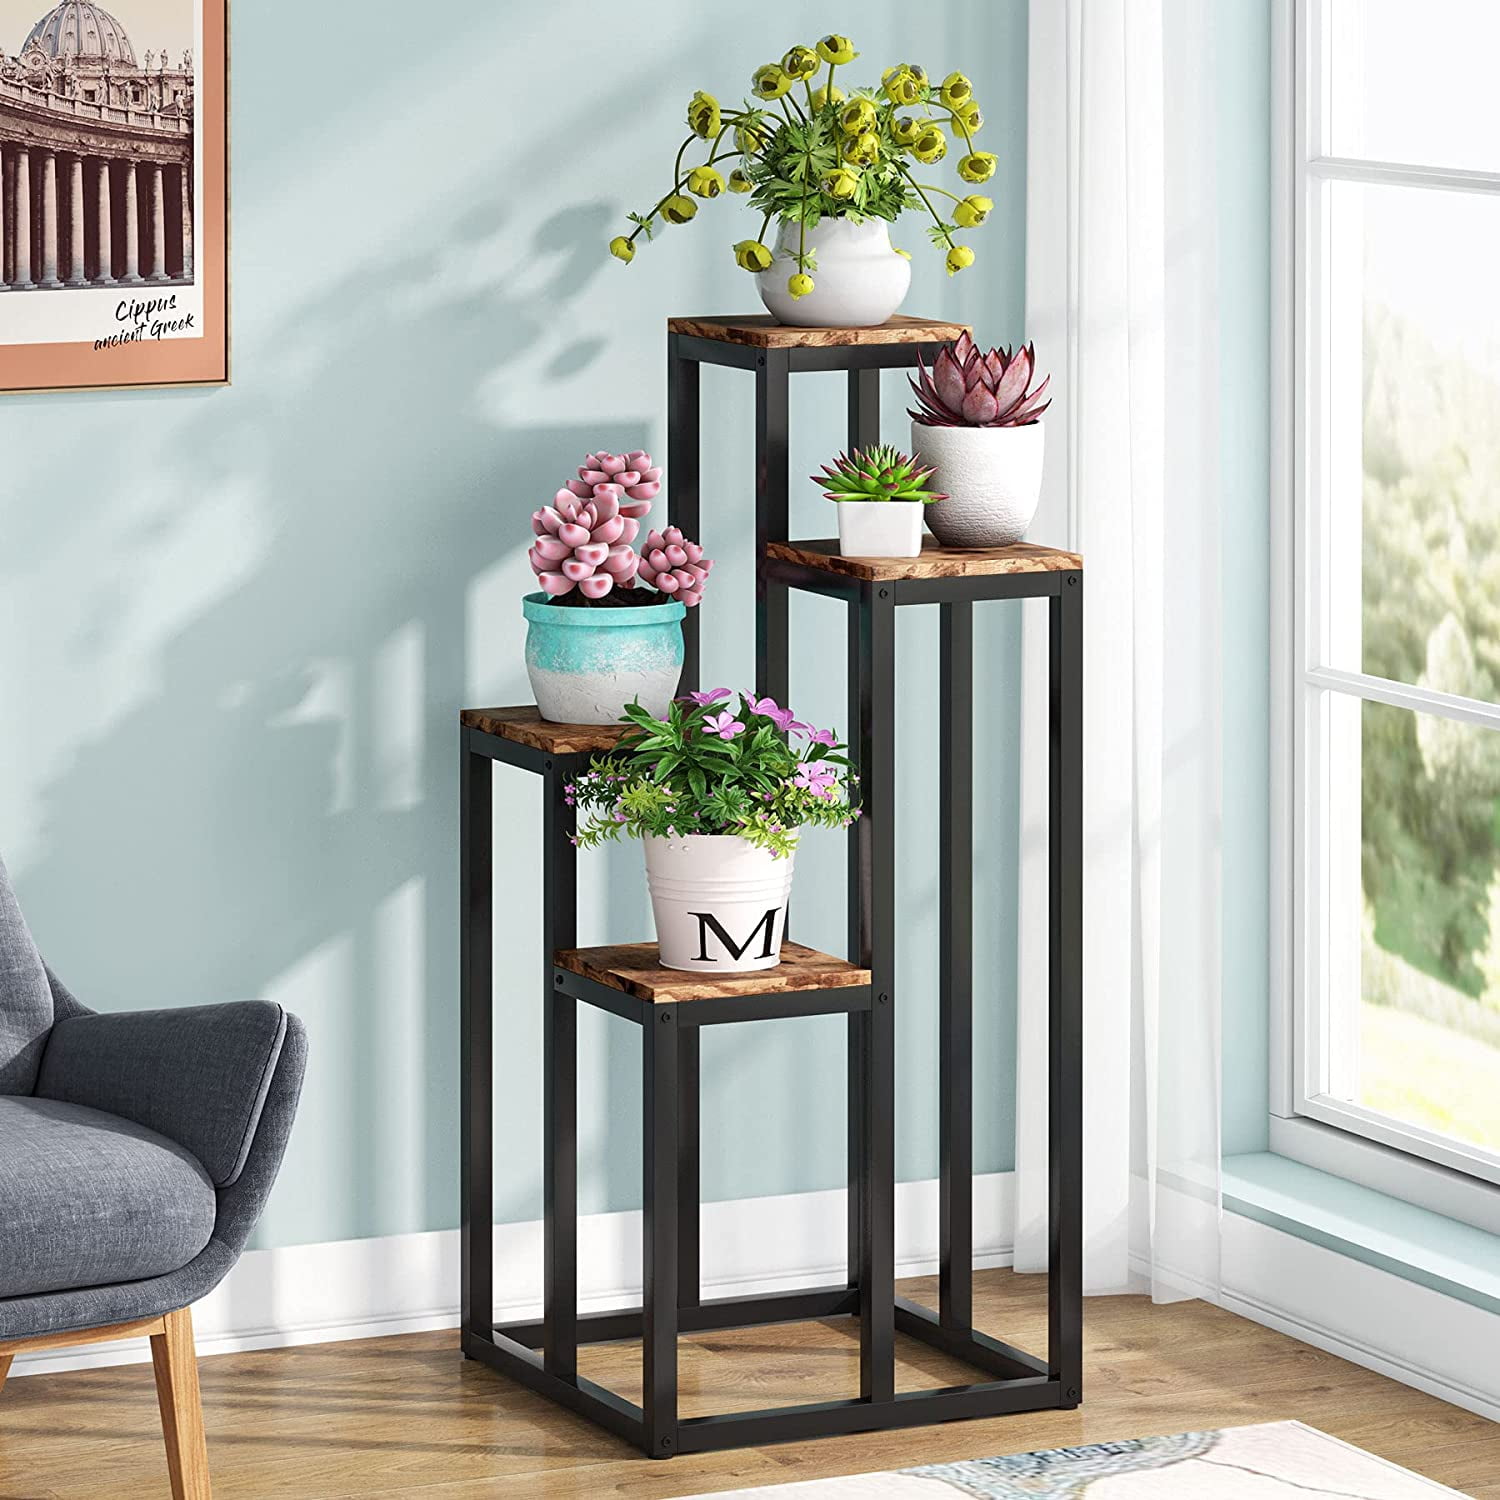 Details about   Indoor Telescopic Plant Stand 4 Tier Rack Shelf Flowers Pot Display Home Decor 